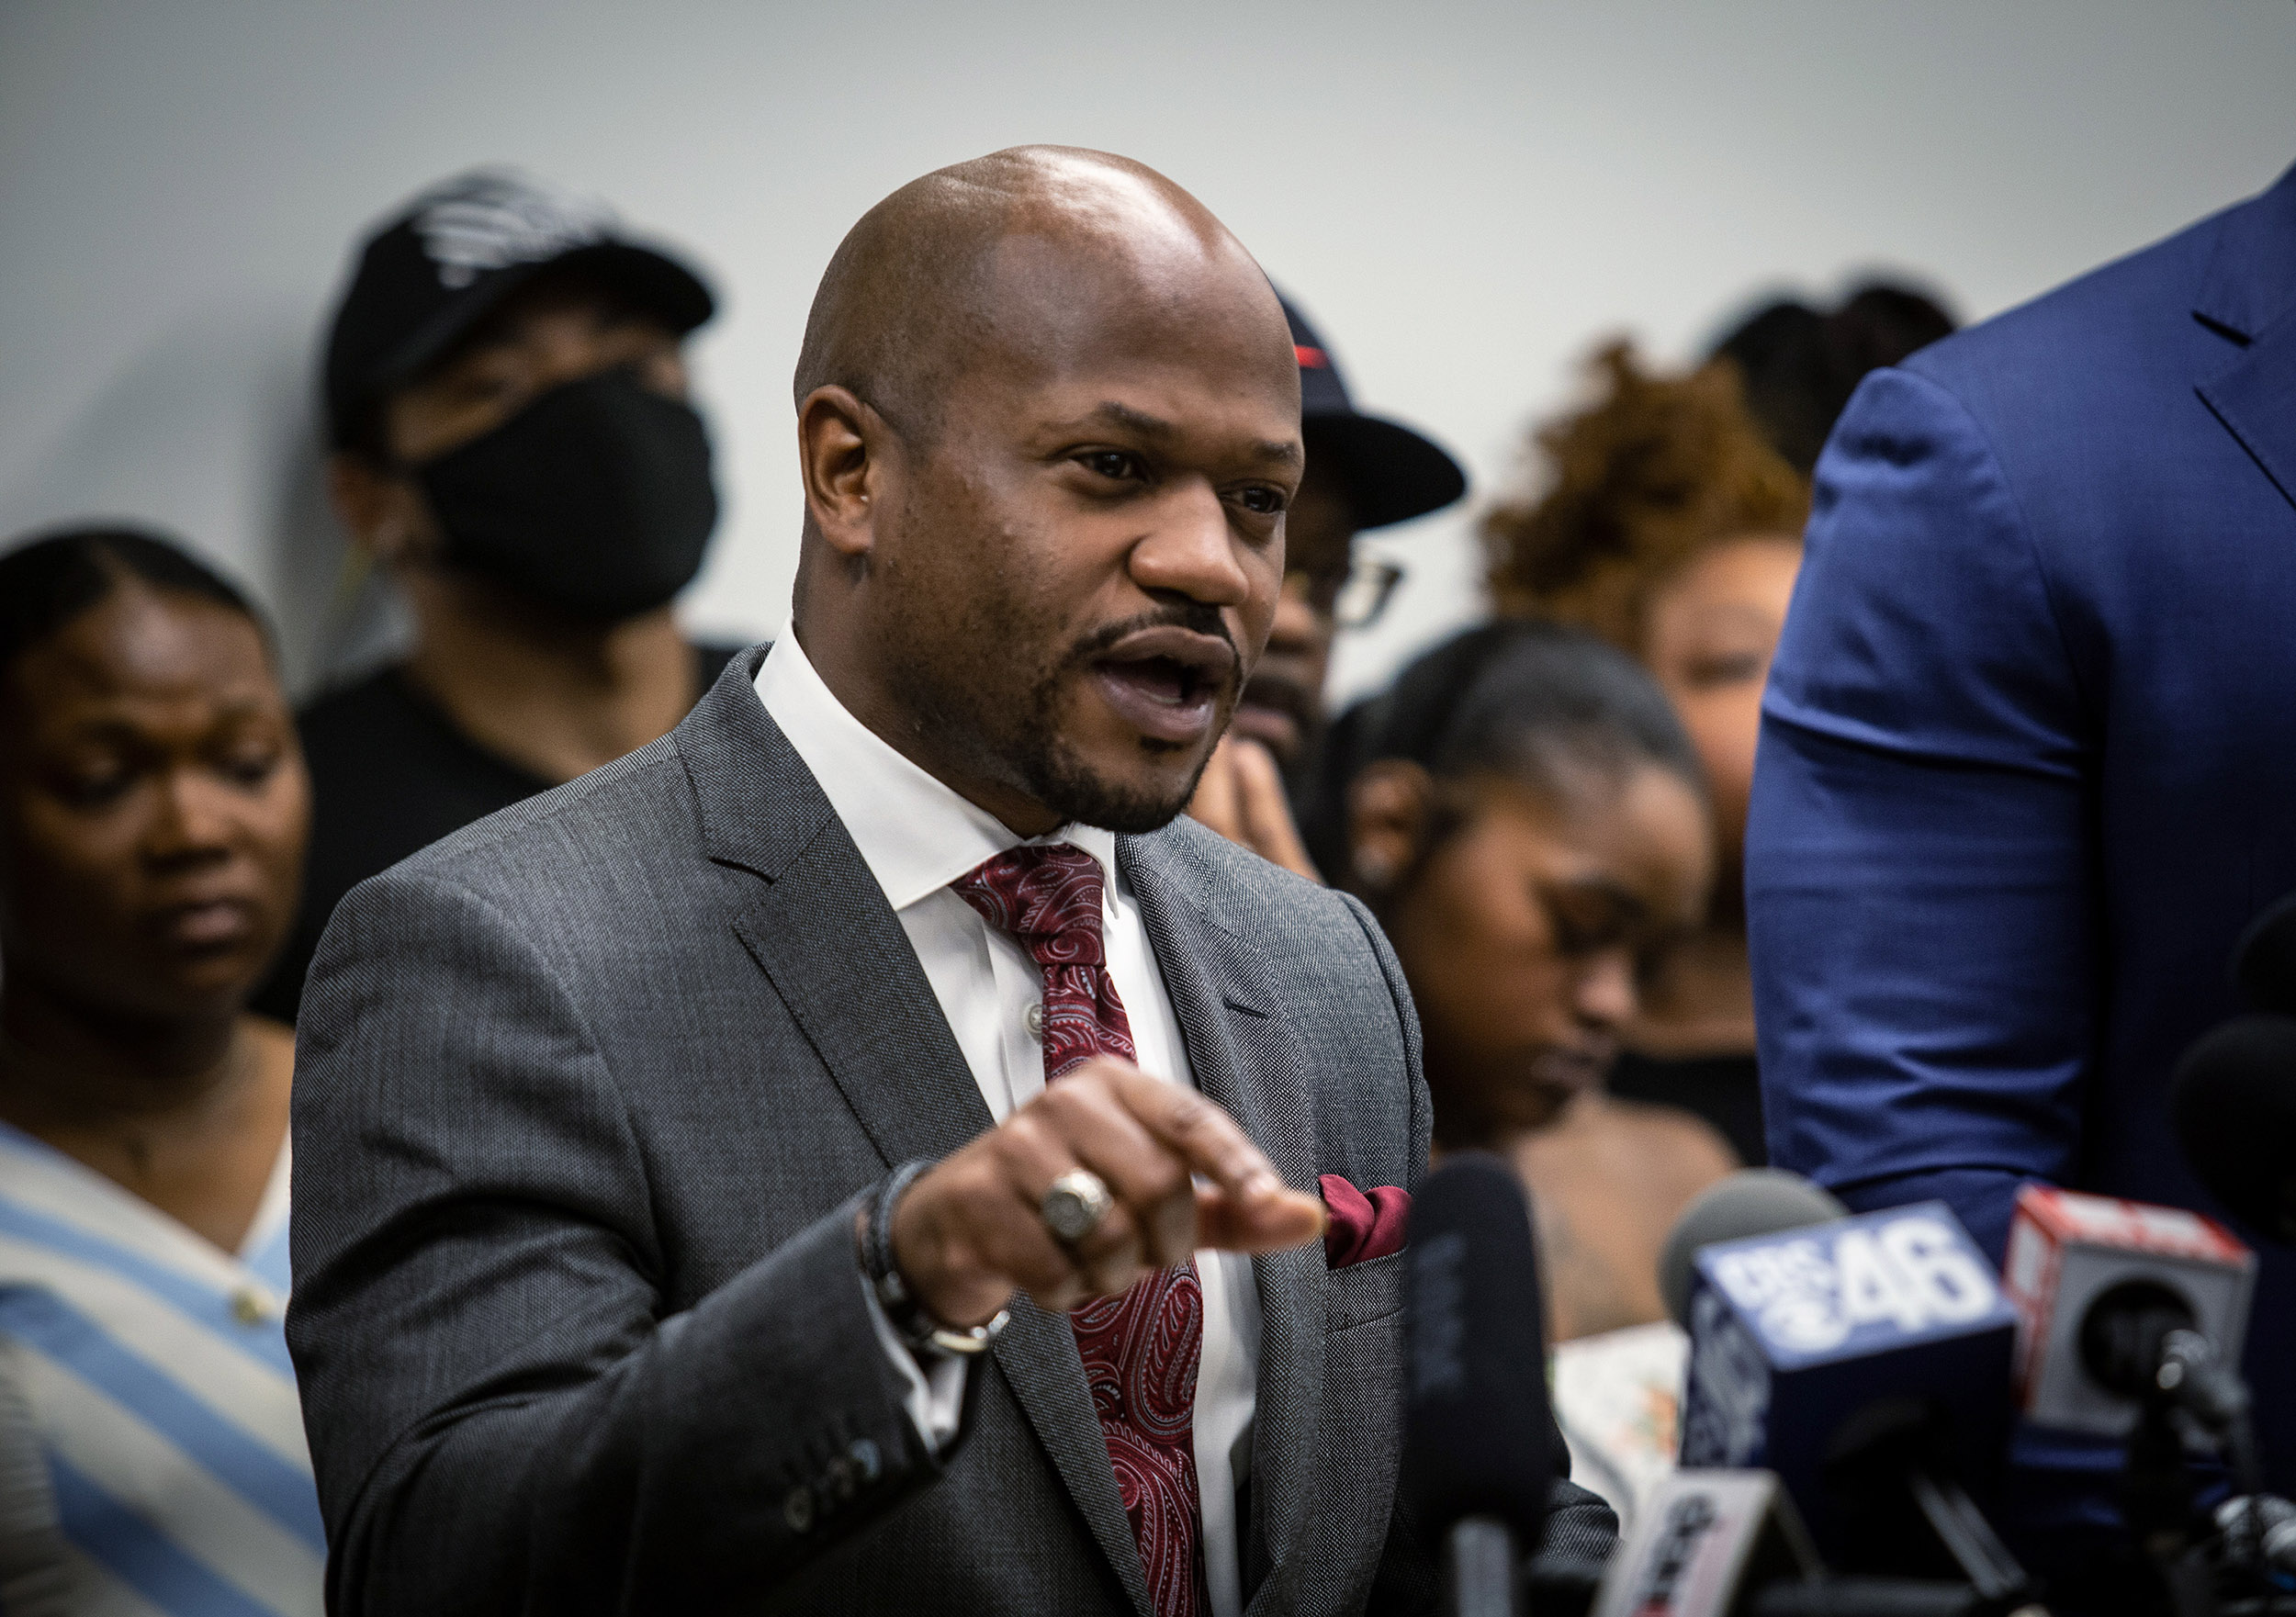 L. Chris Stewart, an attorney for the family of Rayshard Brooks, speaks during a news conference on Monday, June 15, in Atlanta, Georgia. 